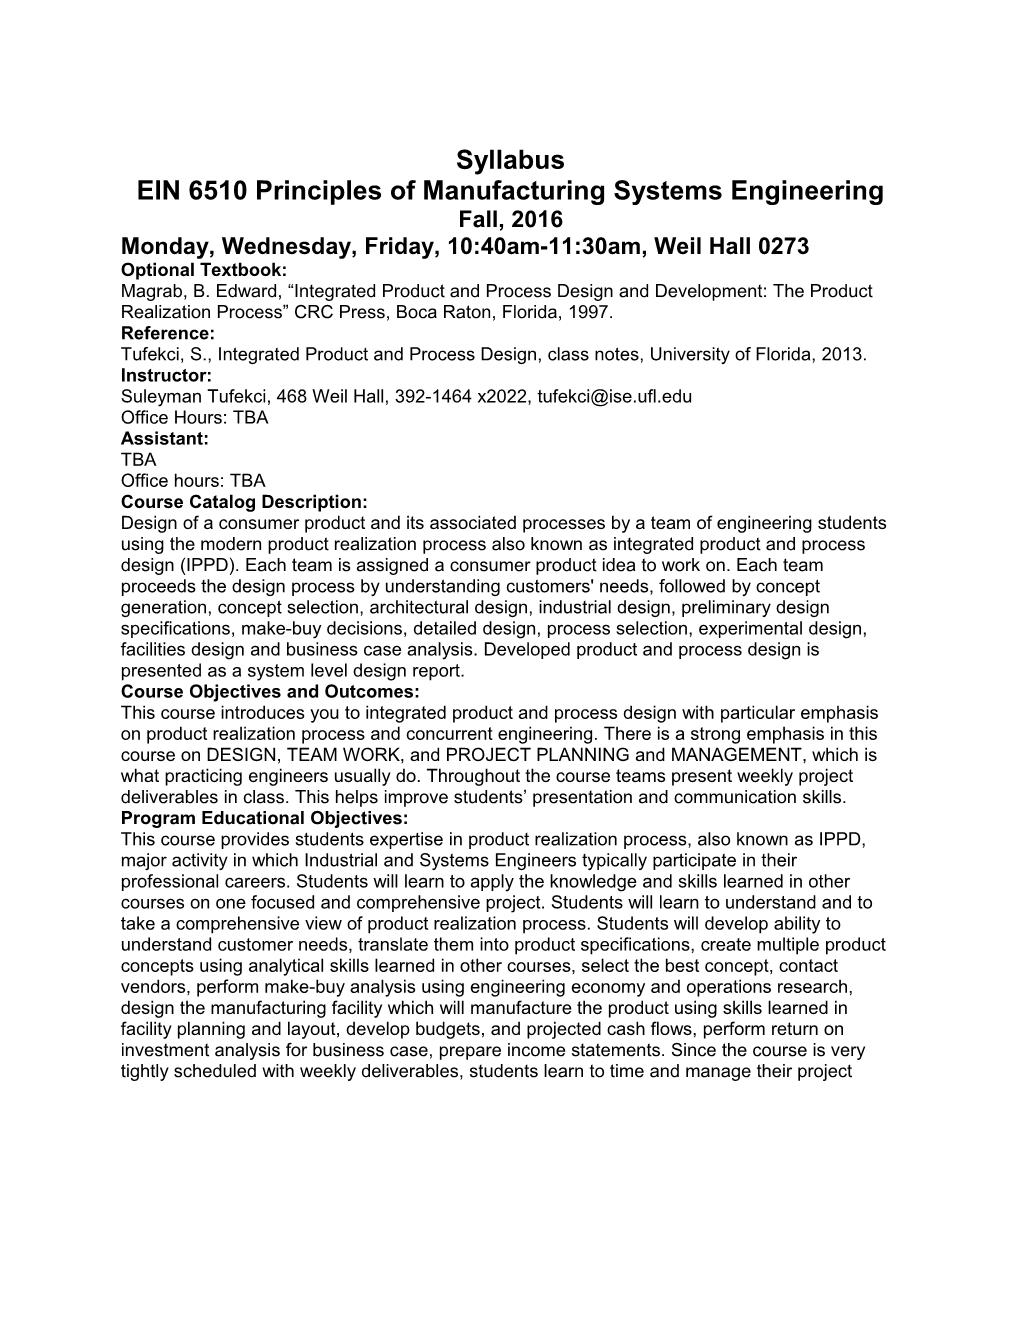 EIN 6510 Principles of Manufacturing Systems Engineering